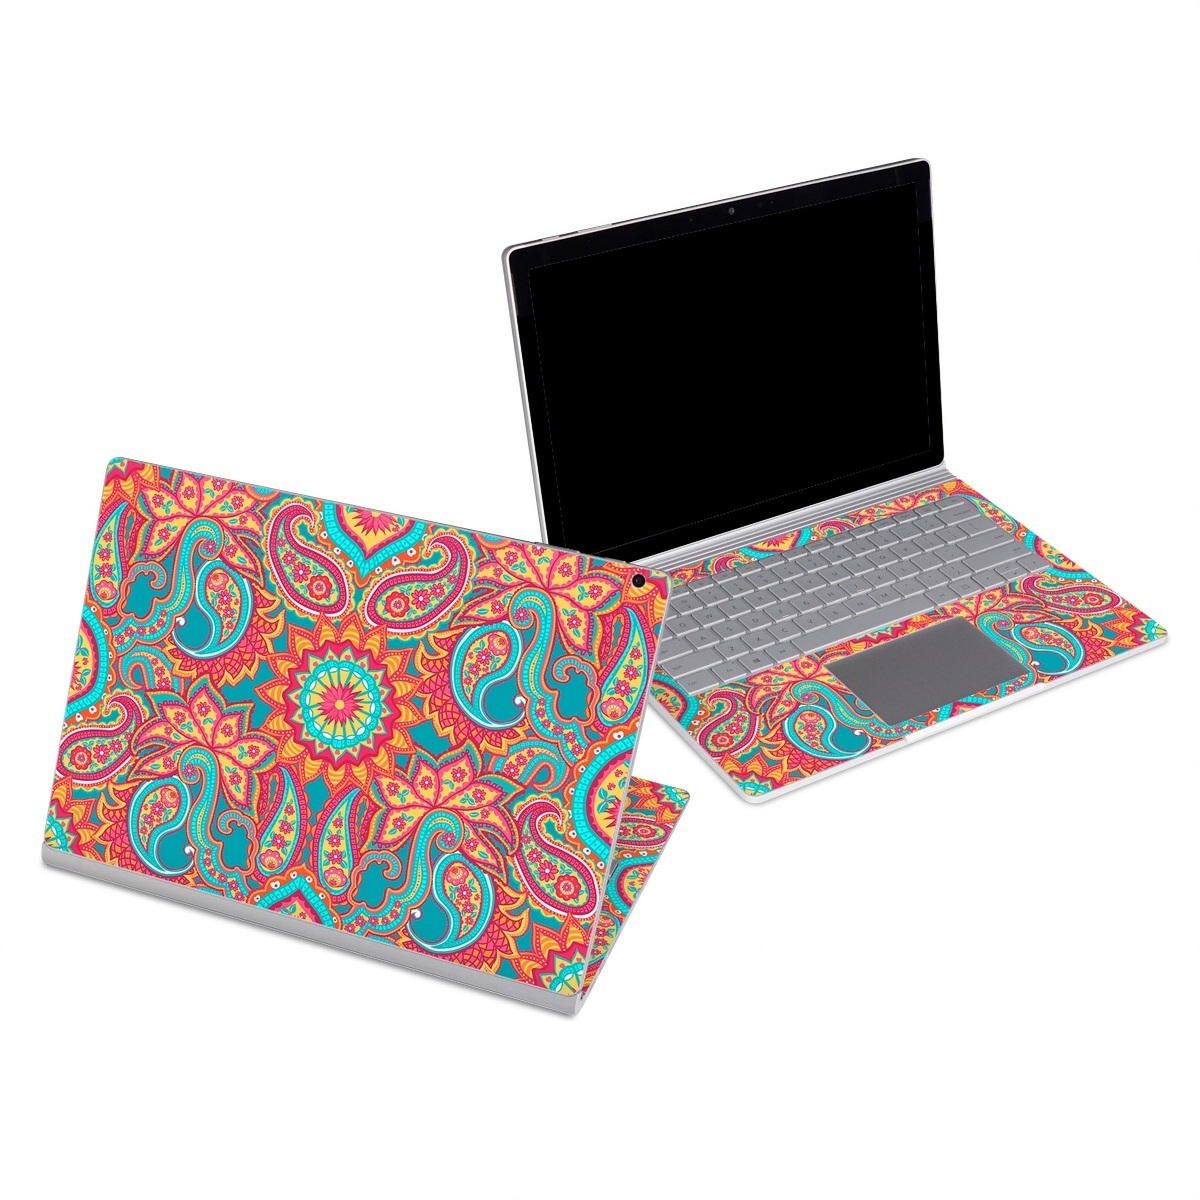 Microsoft Surface Book Series Skin design of Pattern, Paisley, Motif, Visual arts, Design, Art, Textile, Psychedelic art, with orange, yellow, blue, red colors